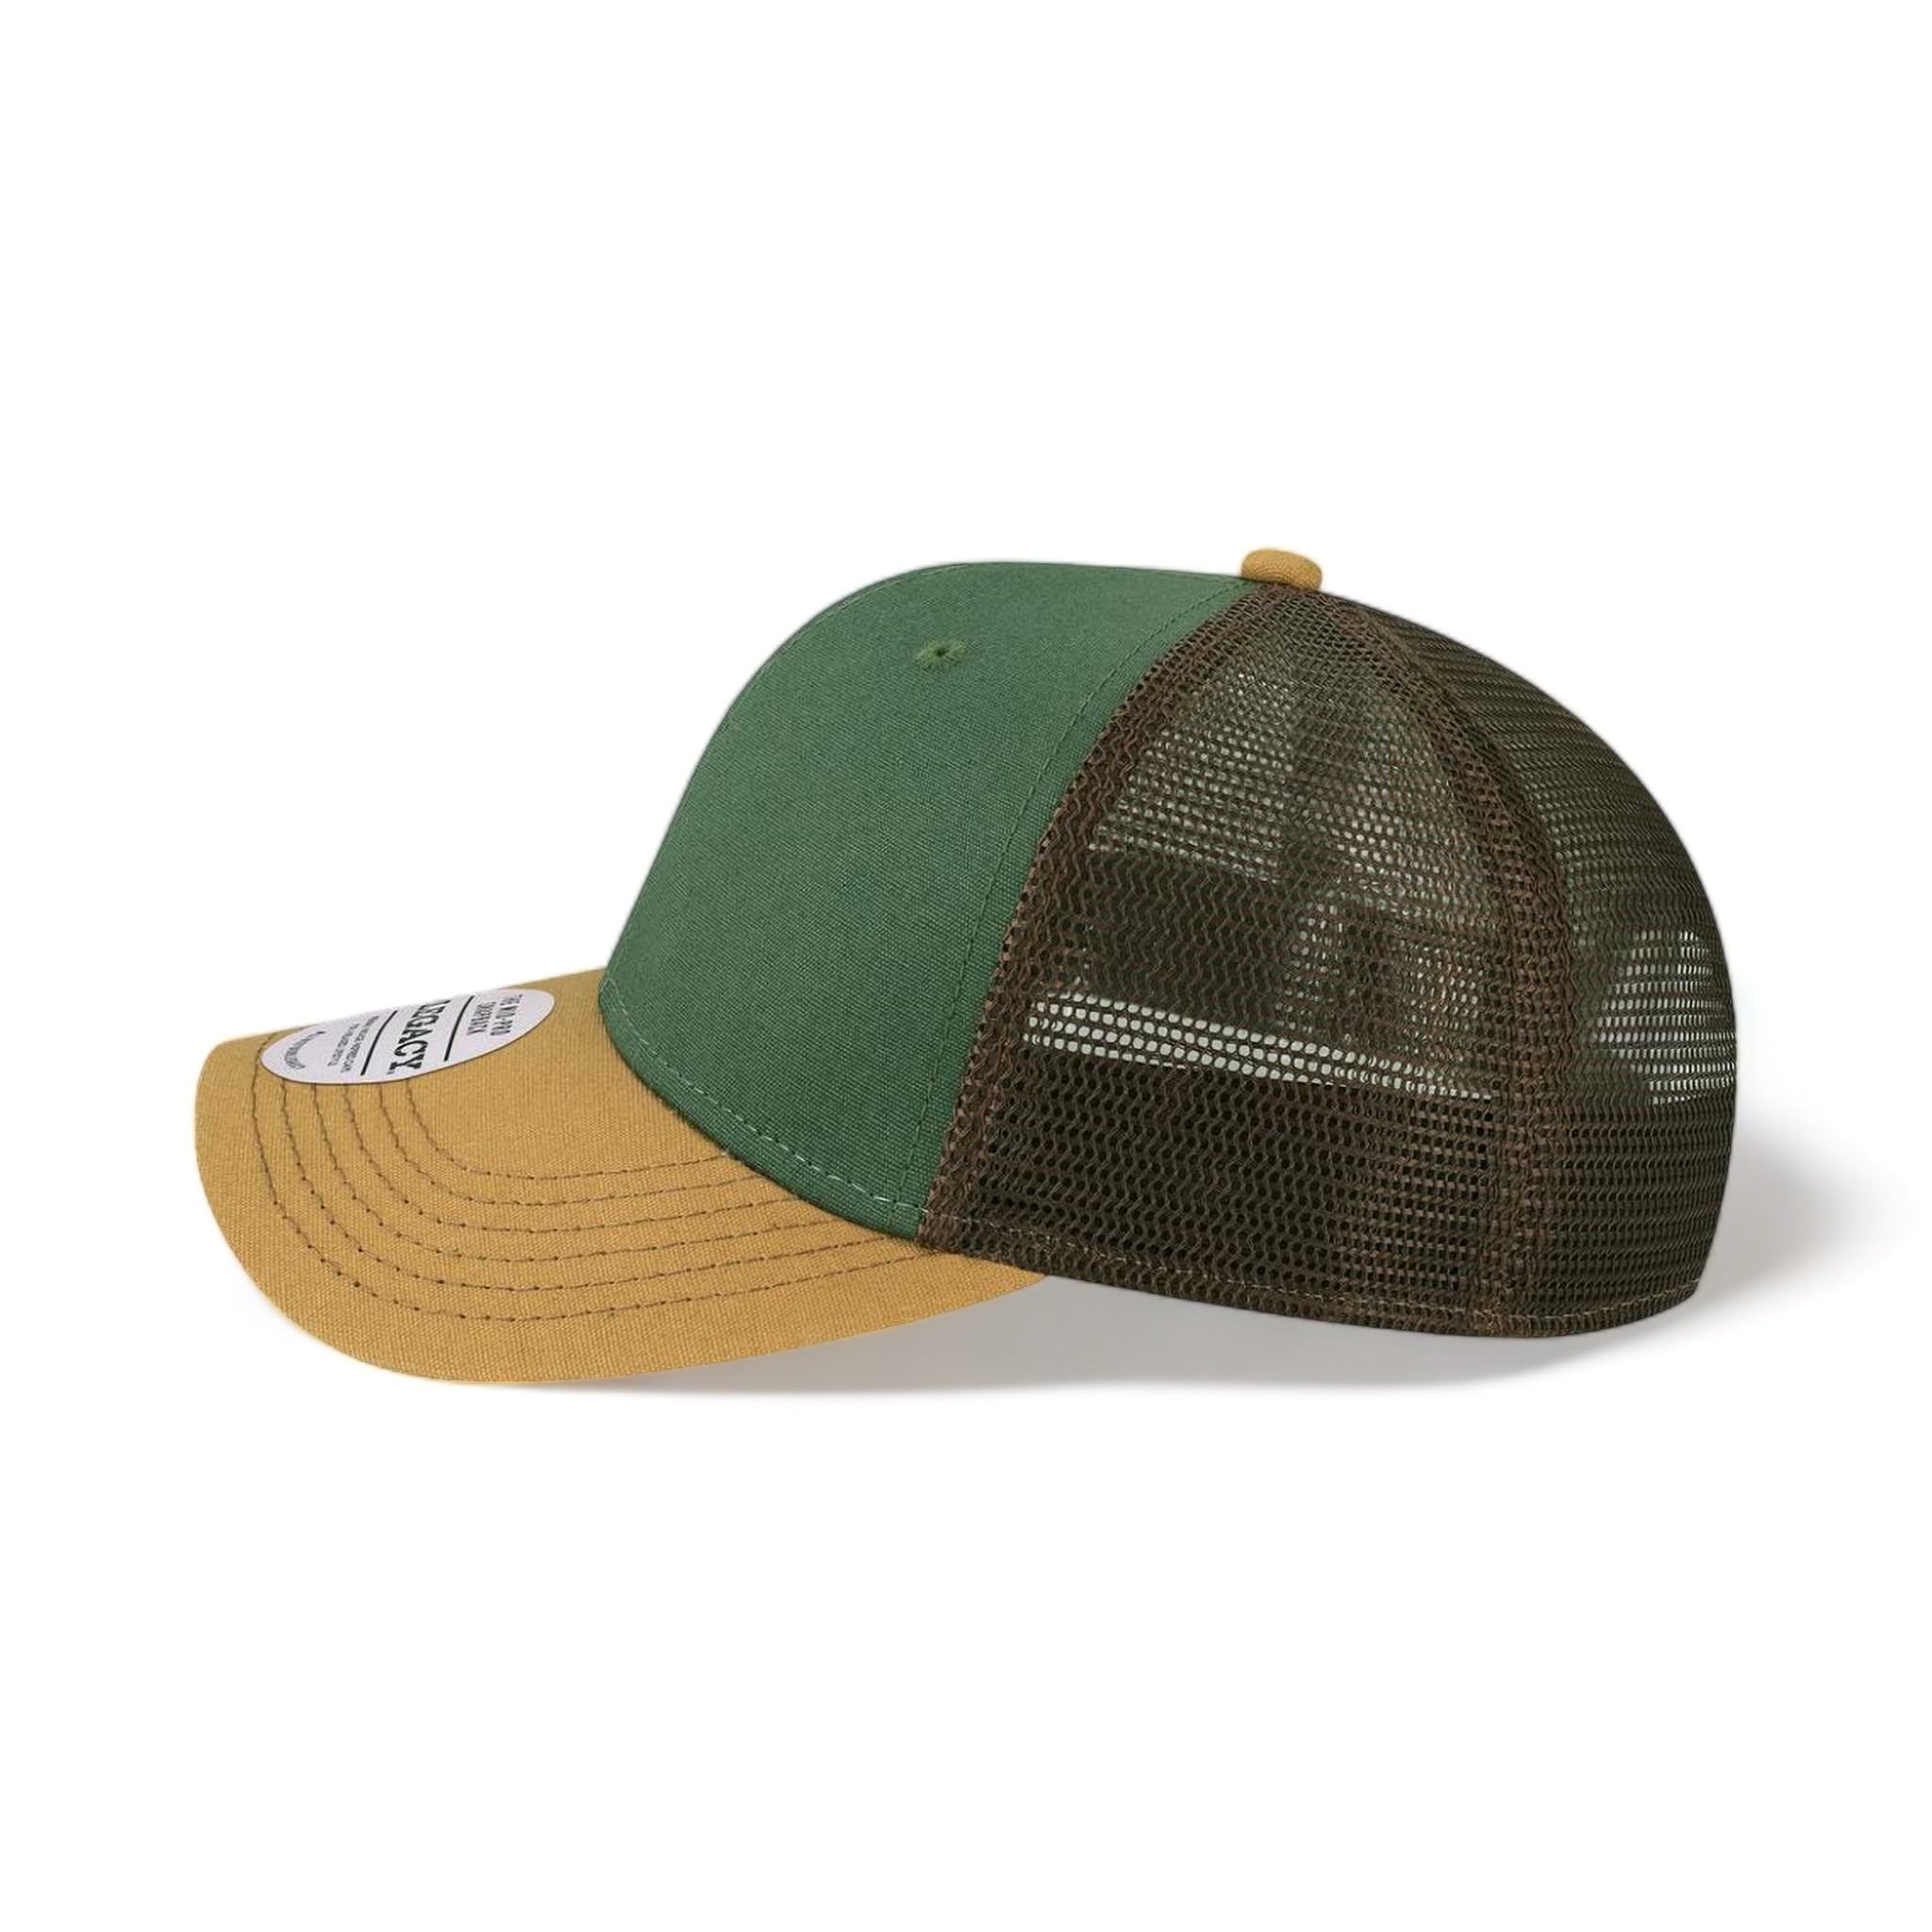 Side view of LEGACY MPS custom hat in dark green, camel and brown